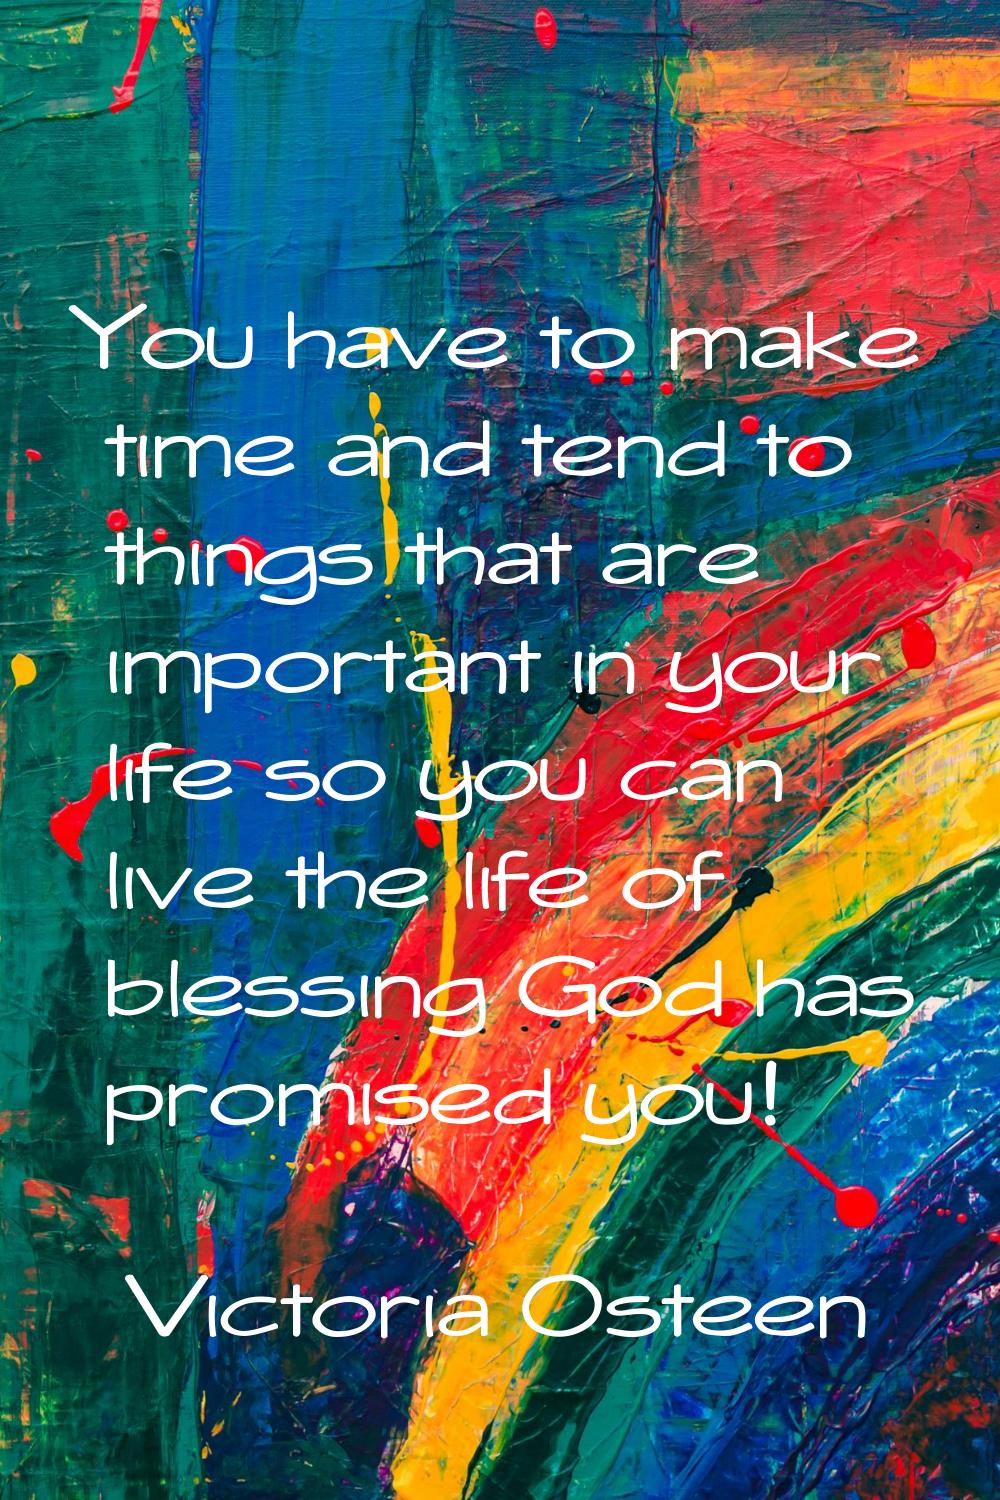 You have to make time and tend to things that are important in your life so you can live the life o